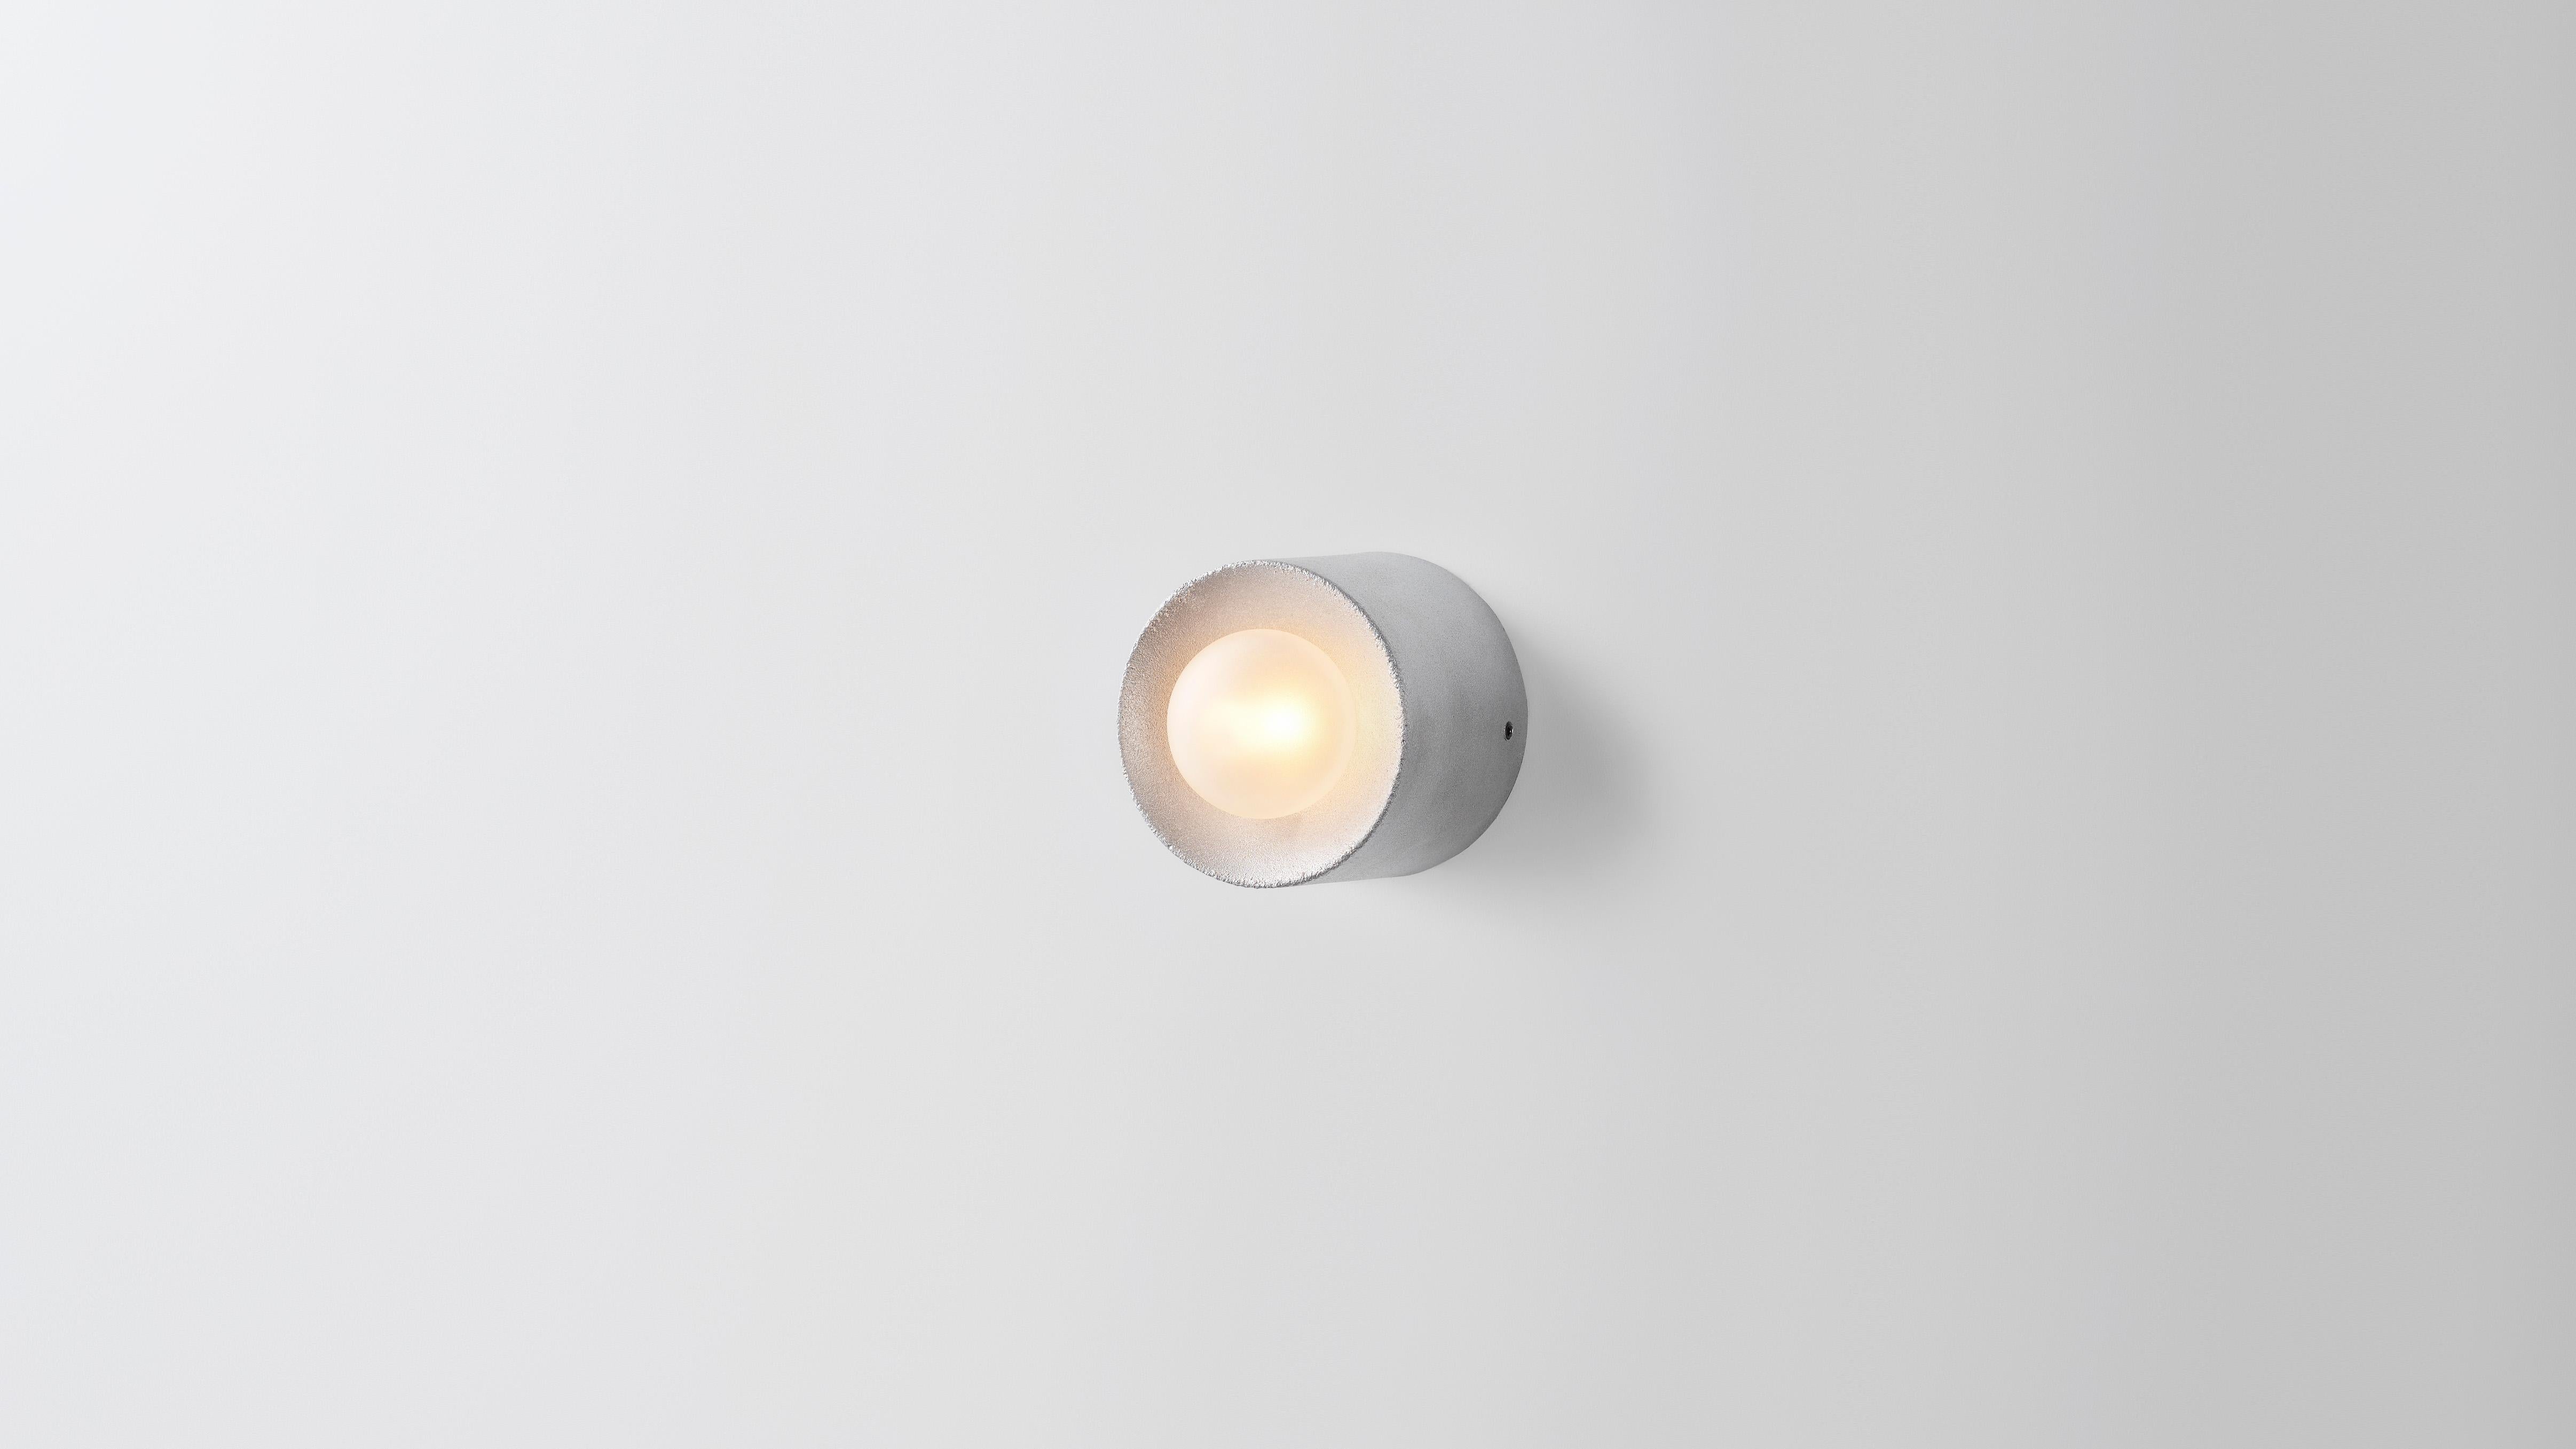 Micro aluminum anton wall sconce by Volker Haug
Dimensions: Ø 8 x D 6.5 cm.
Material: Cast aluminum.
Finish: Raw
Lamp: G9 LED (240V / 120V US). 12V option is available.
Glass bulb: 45mm ø, Frosted
Weight: 1 kg (Aluminium).
Available in Gunmetal and